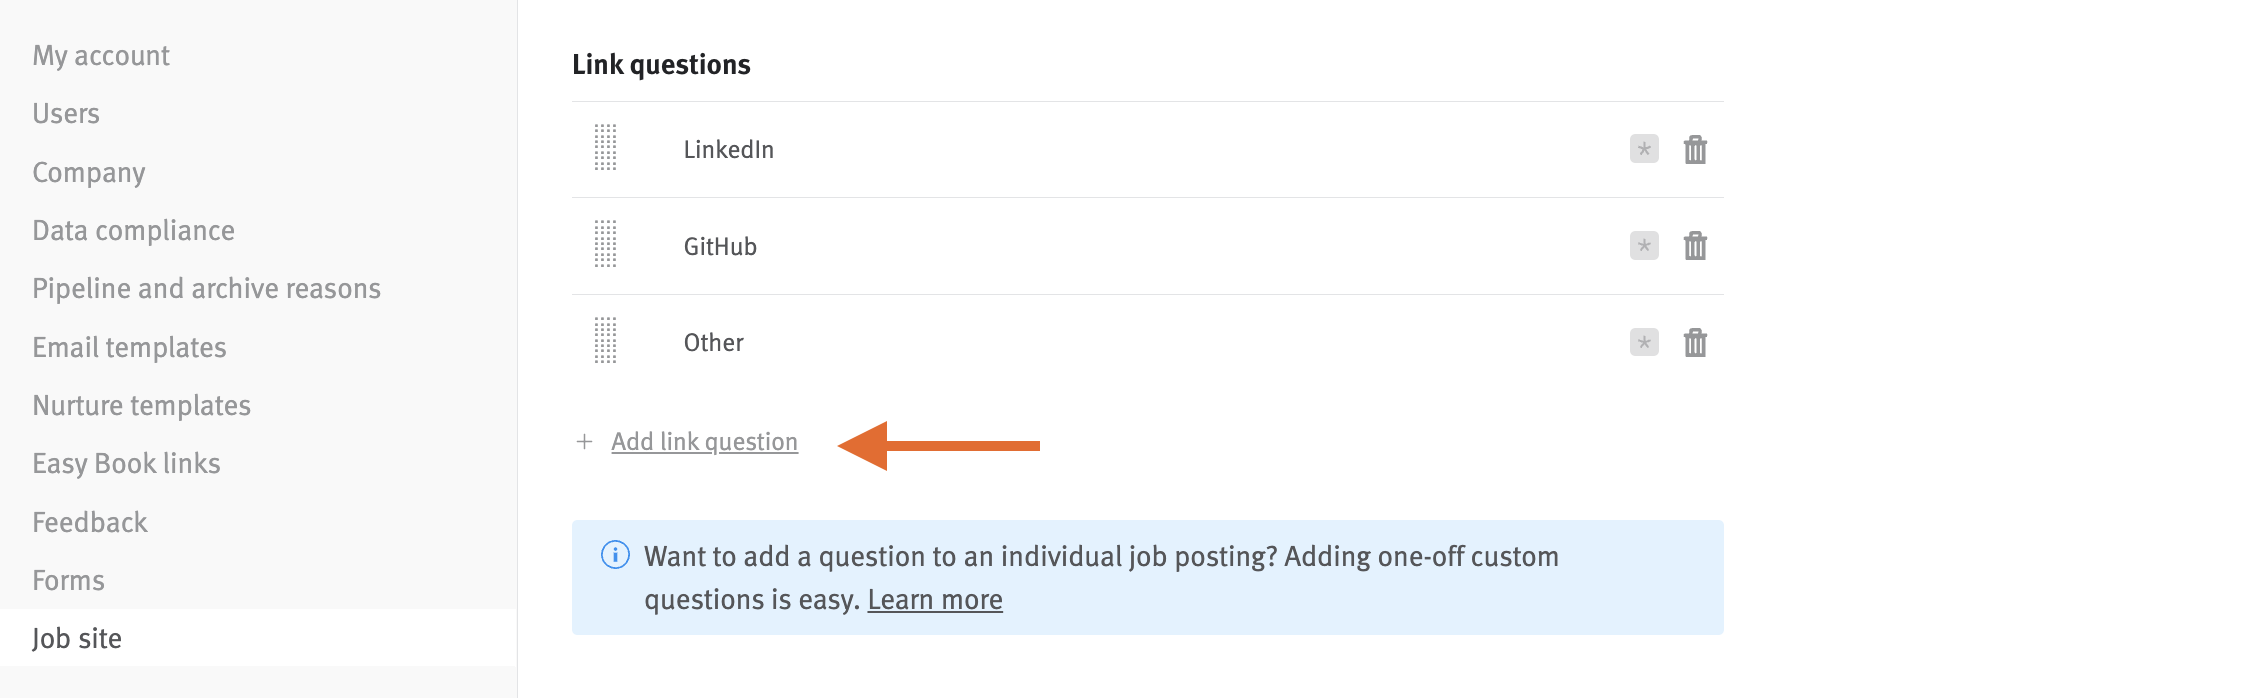 Link questions section with arrow pointing to add link question button